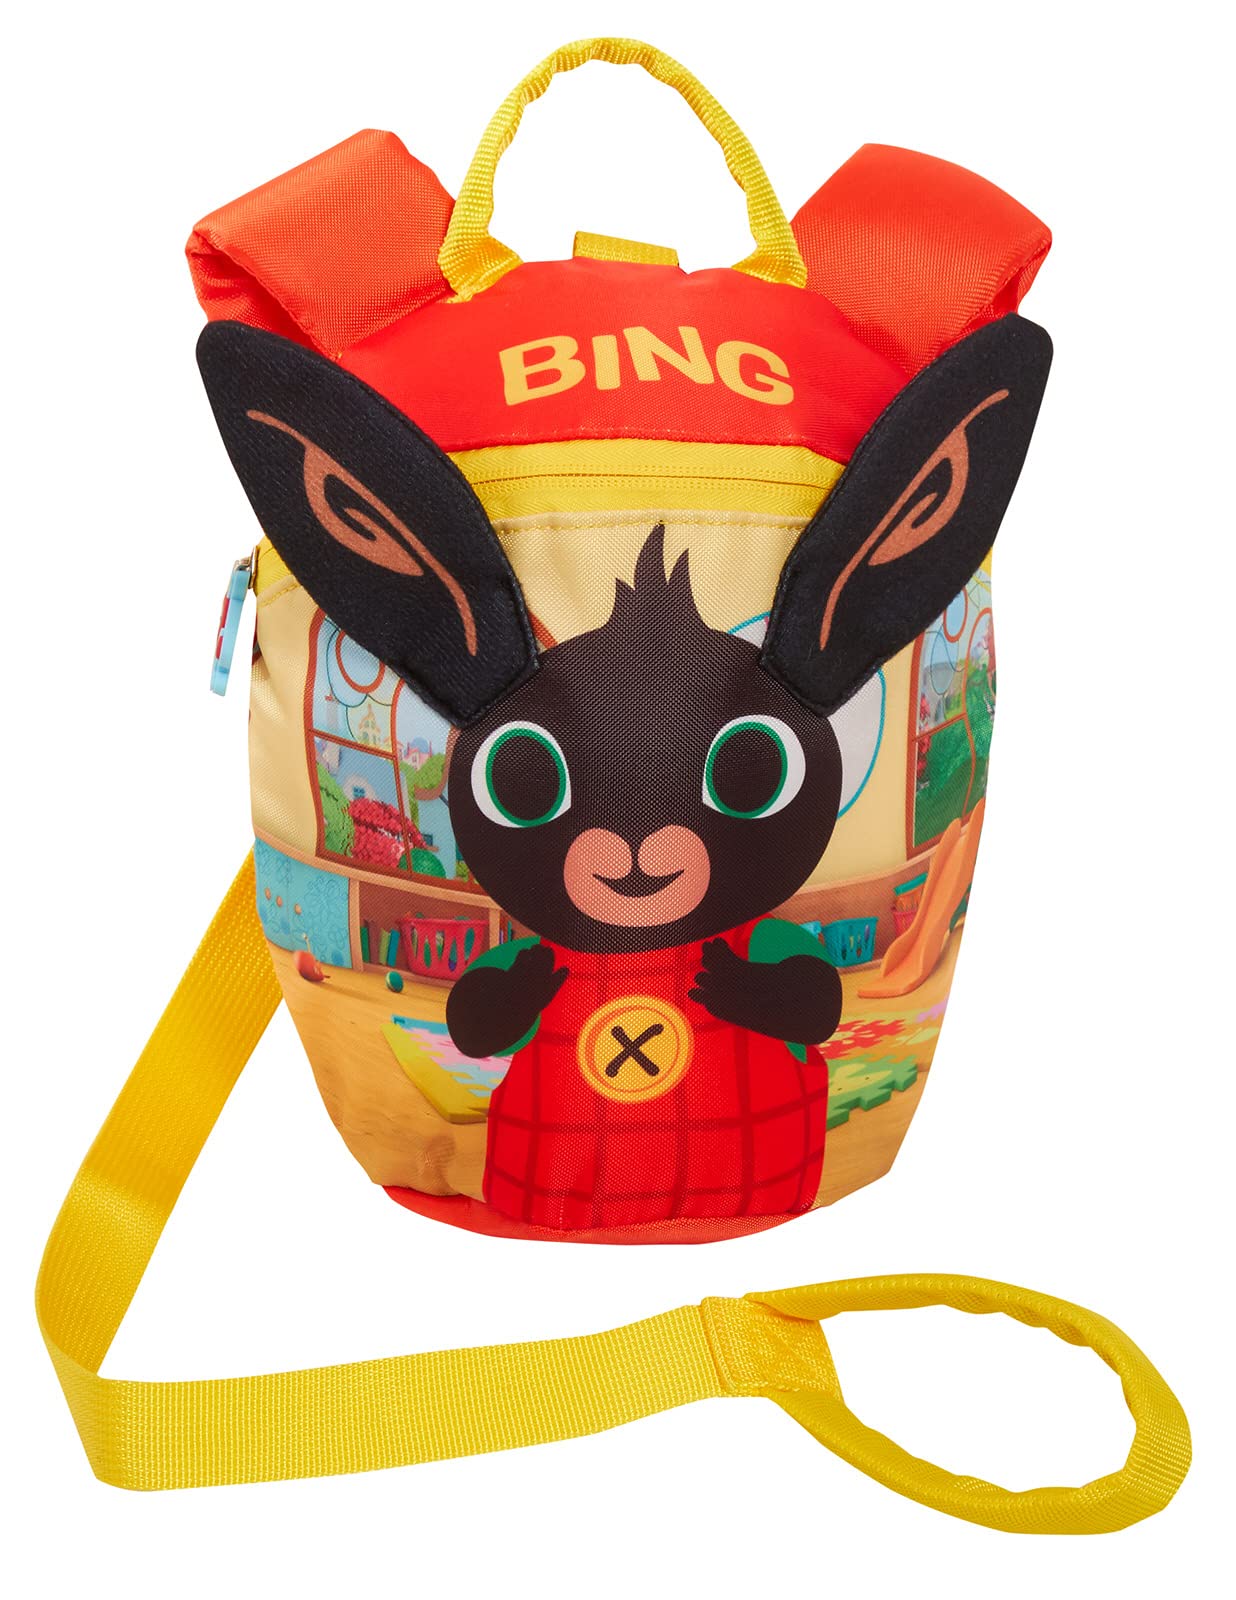 Boys Girls 3D Ears Bing Bunny Backpack with Reins Kids Detachable Safety Harness Nursery Bag